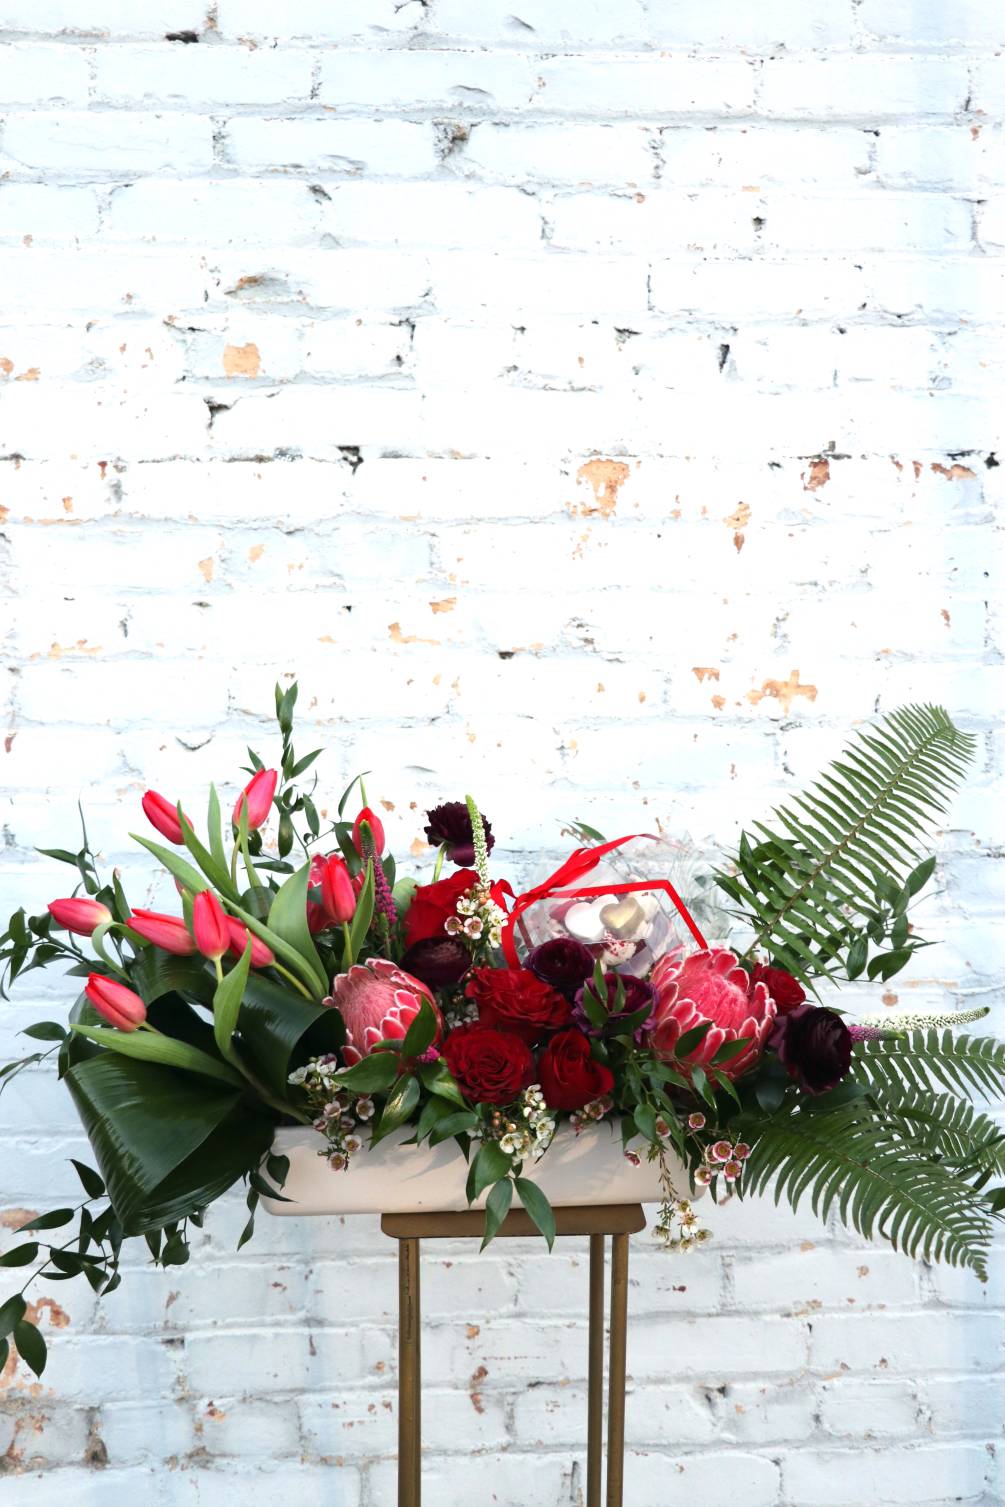 Stunning floral arrangement paired with a gift of your choosing. Participating businesses